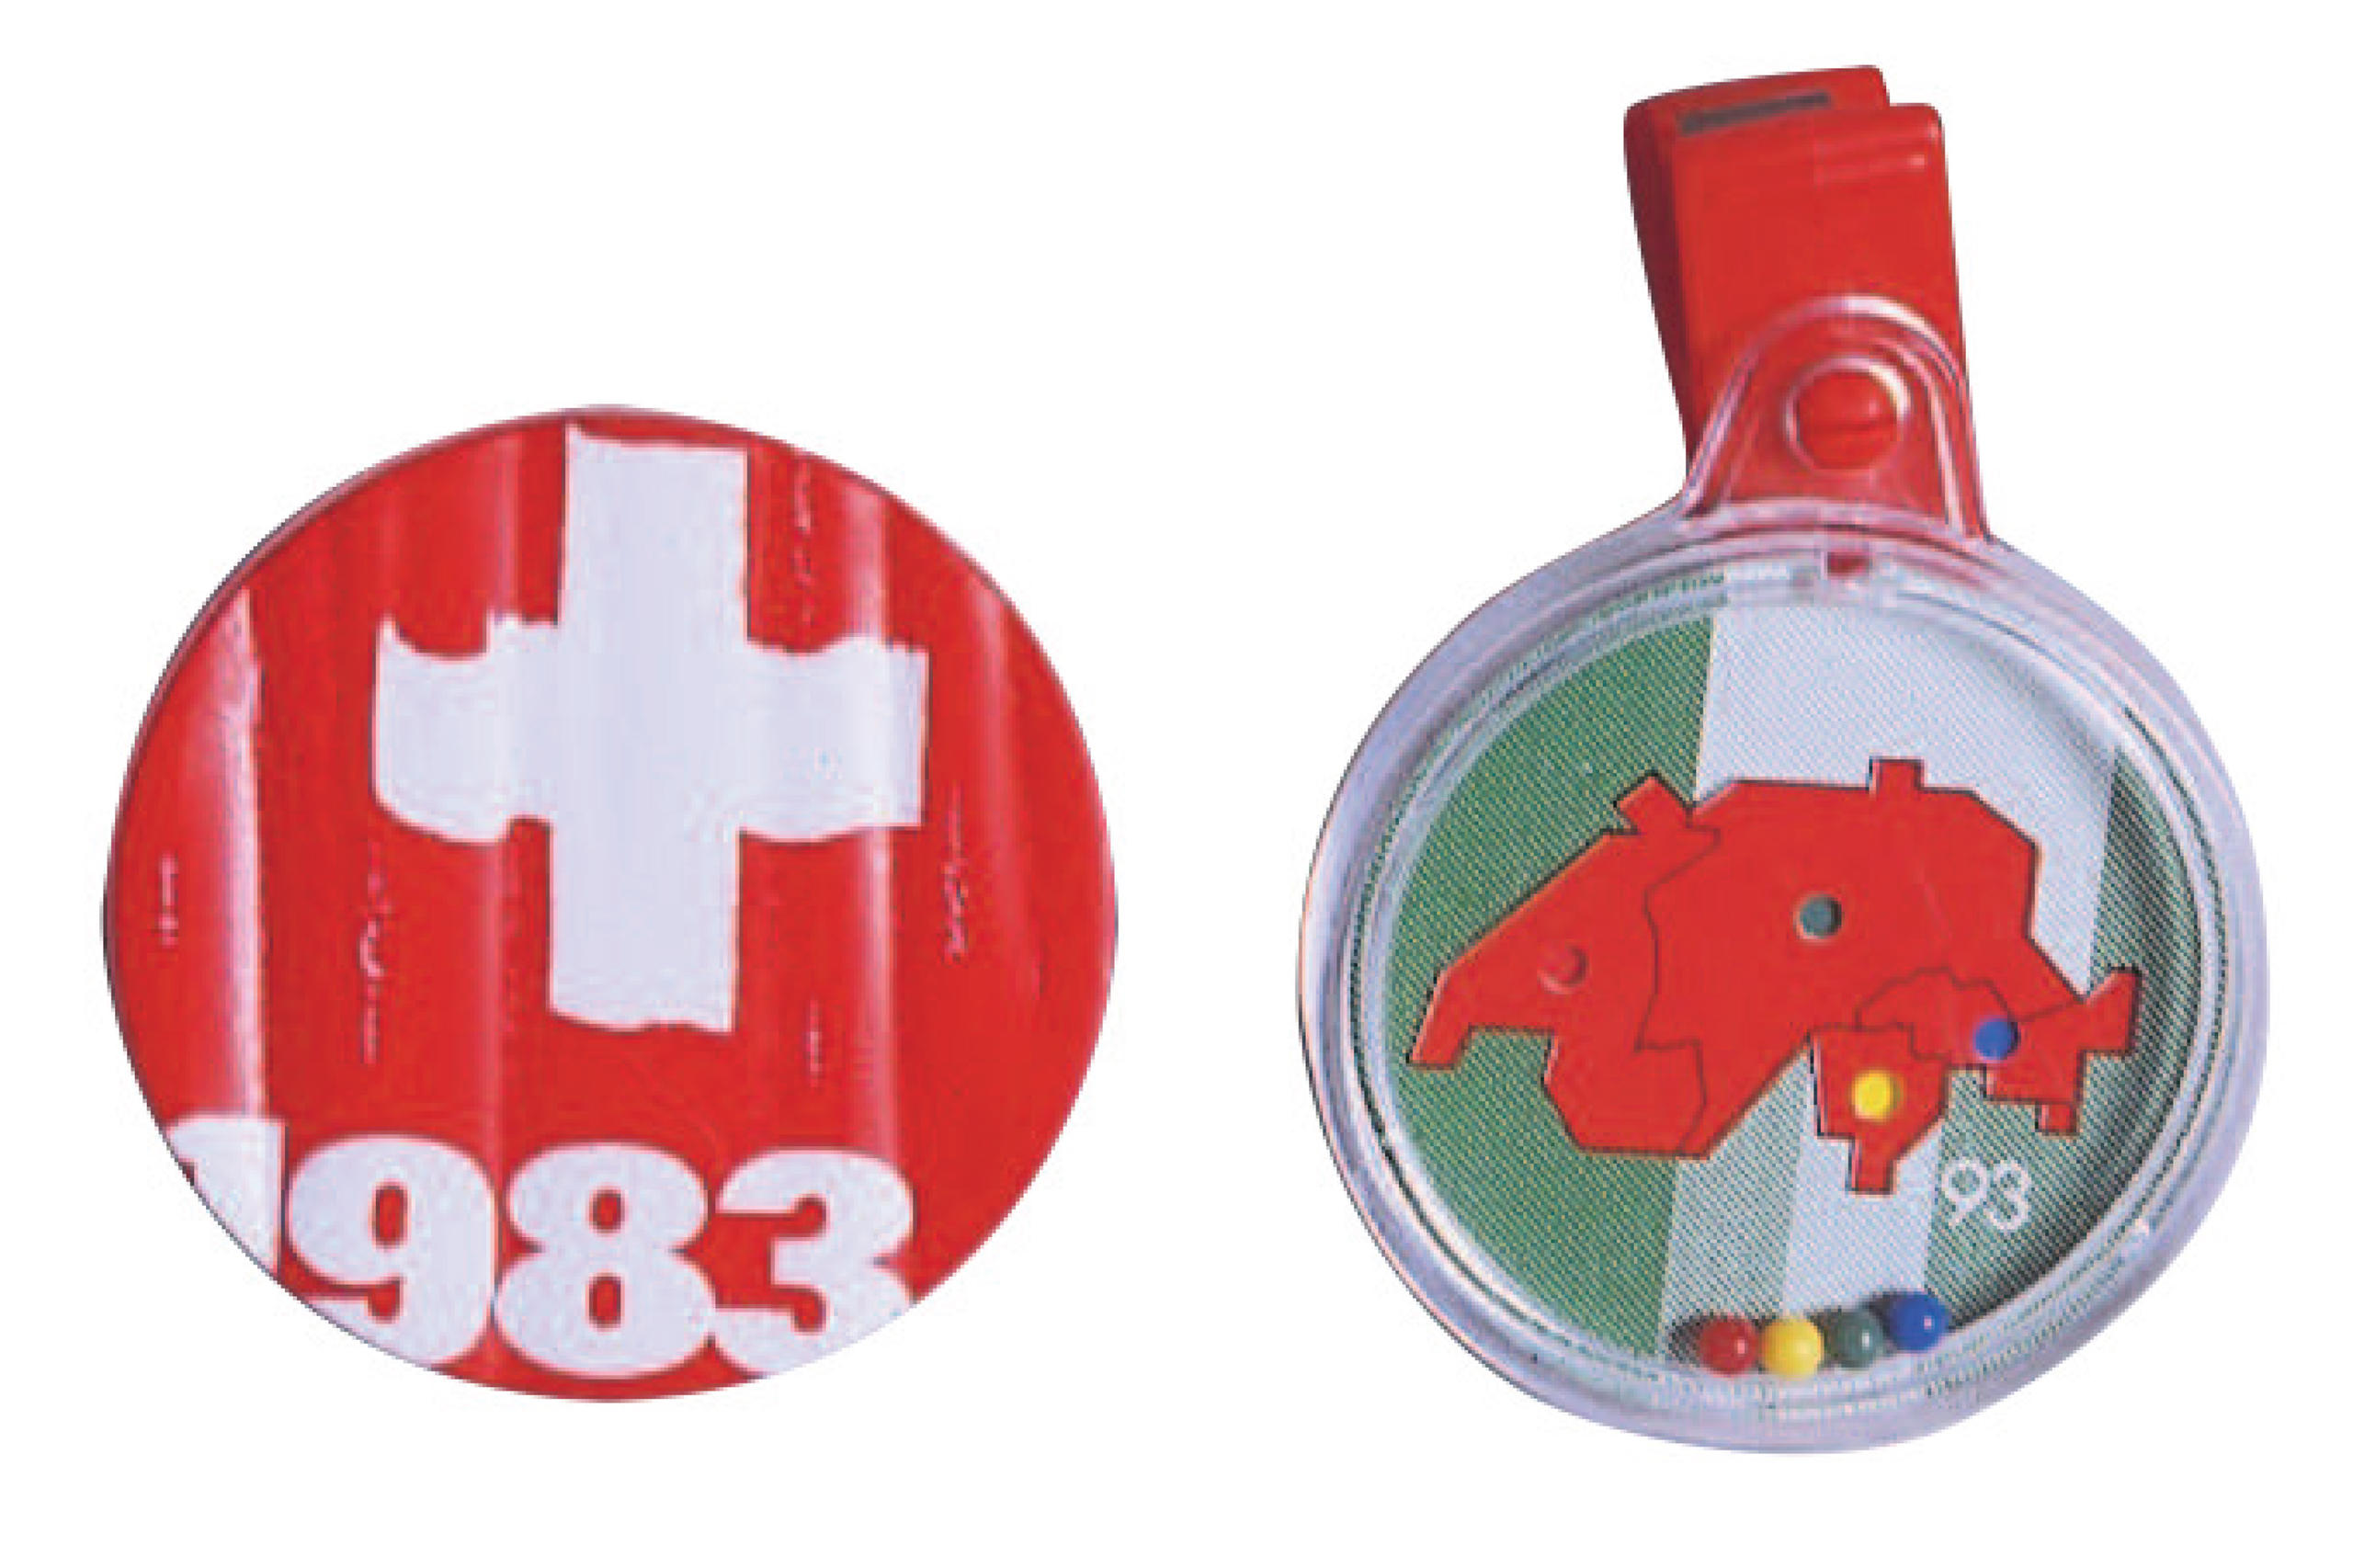 2 badges - one depicting the Swiss Cross and date 1983, the other plastic with the swiss map fill in red